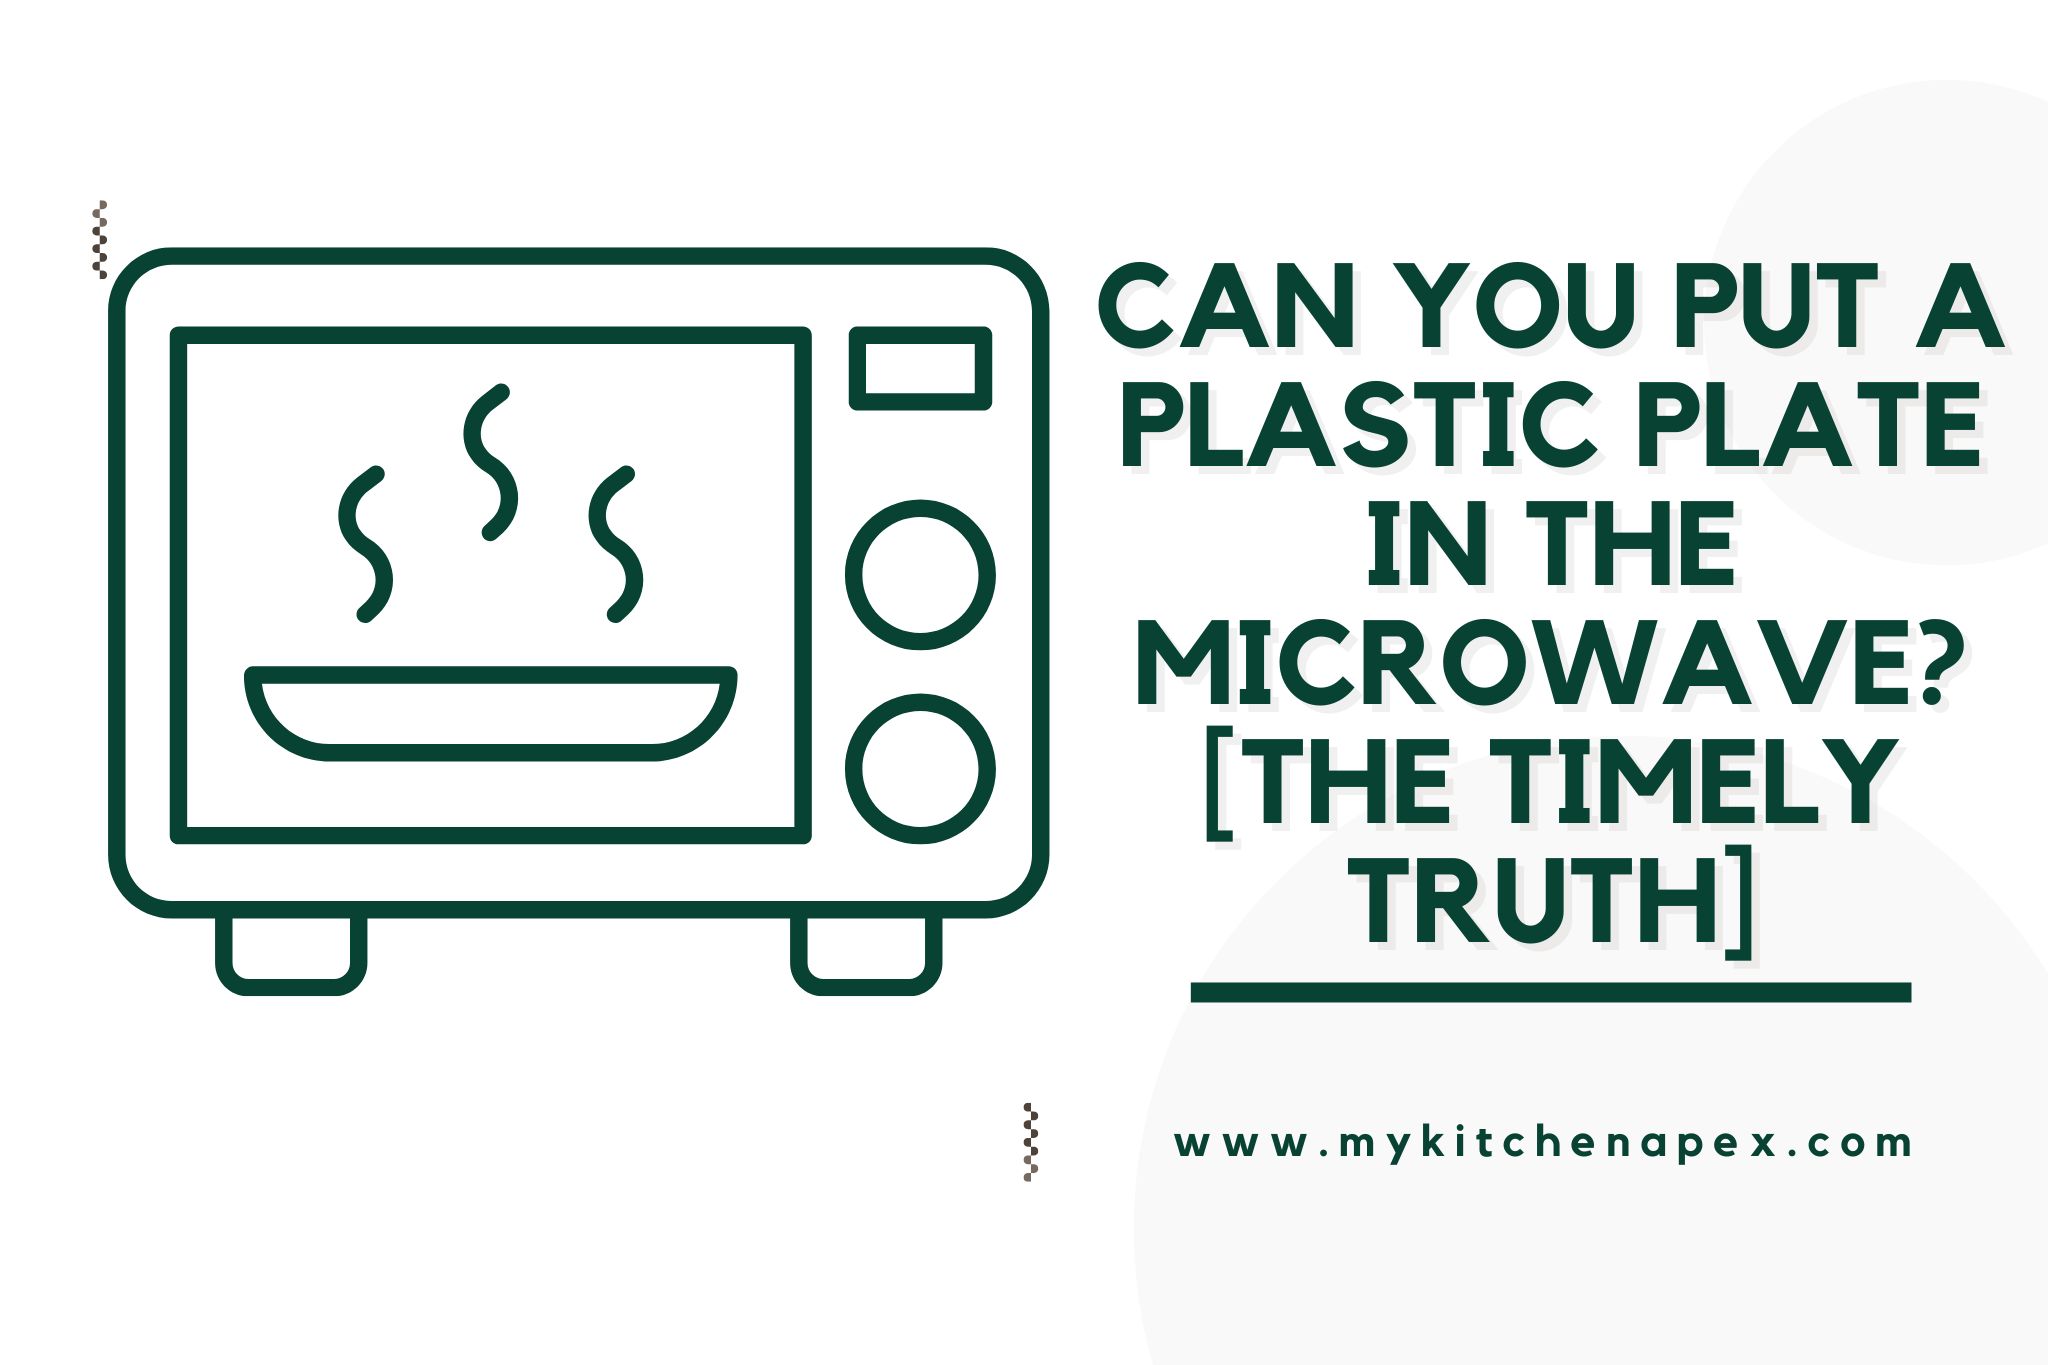 Can You Put A Plastic Plate In The Microwave? [The Timely TRUTH]